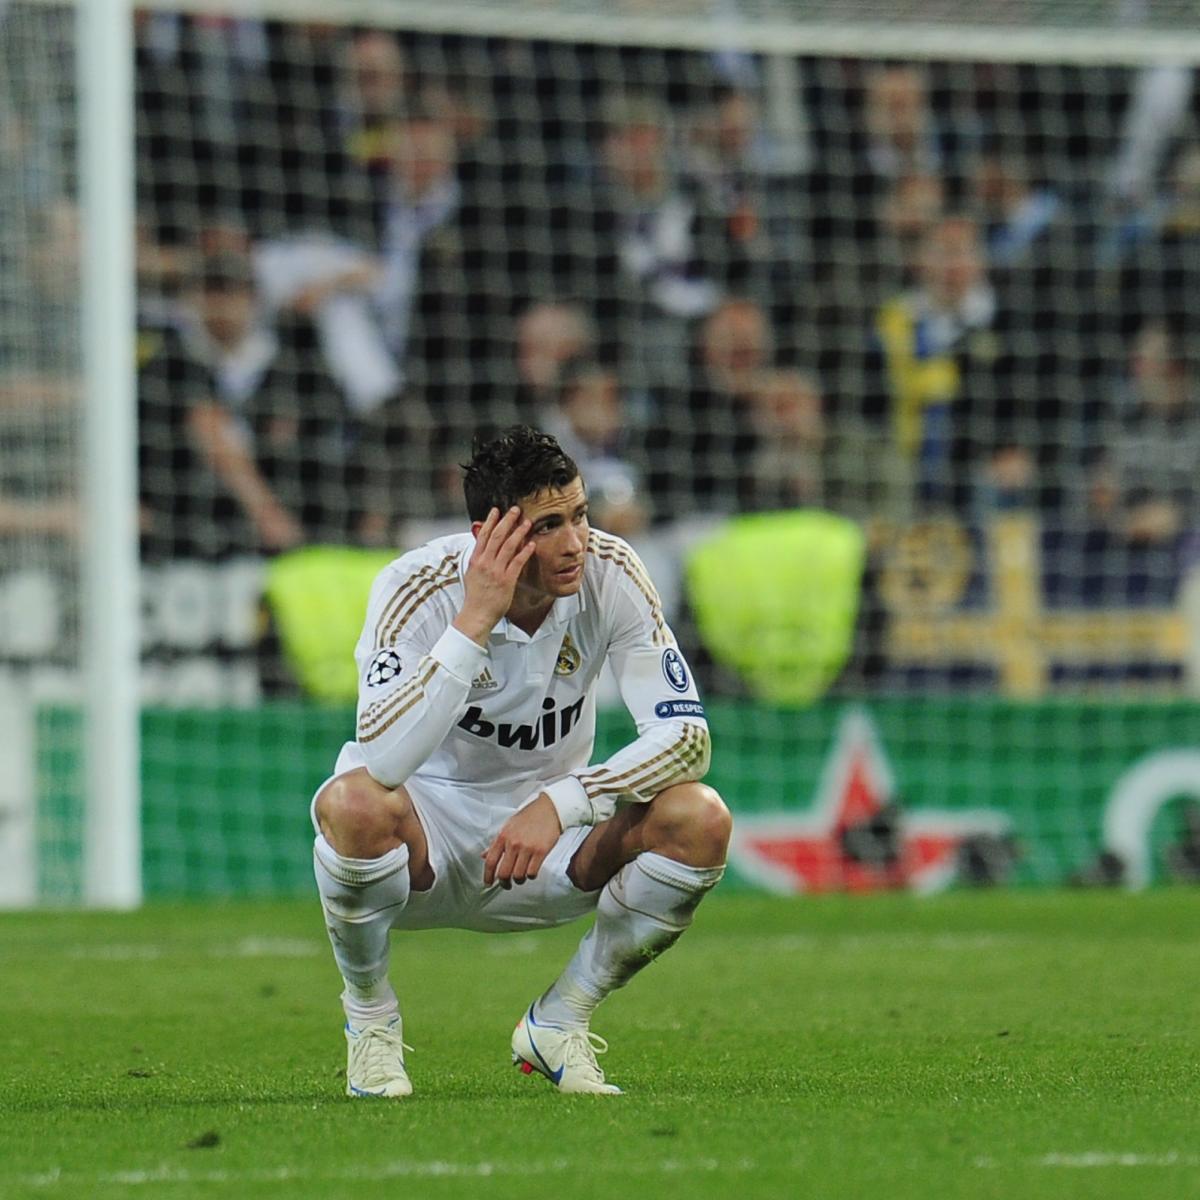 Cristiano Ronaldo, In 2012 after Real Madrid got knocked out by Bayern  Munich:I owe you a Champions League final and I won't fail in you. He  followed this by winning 4 Champions